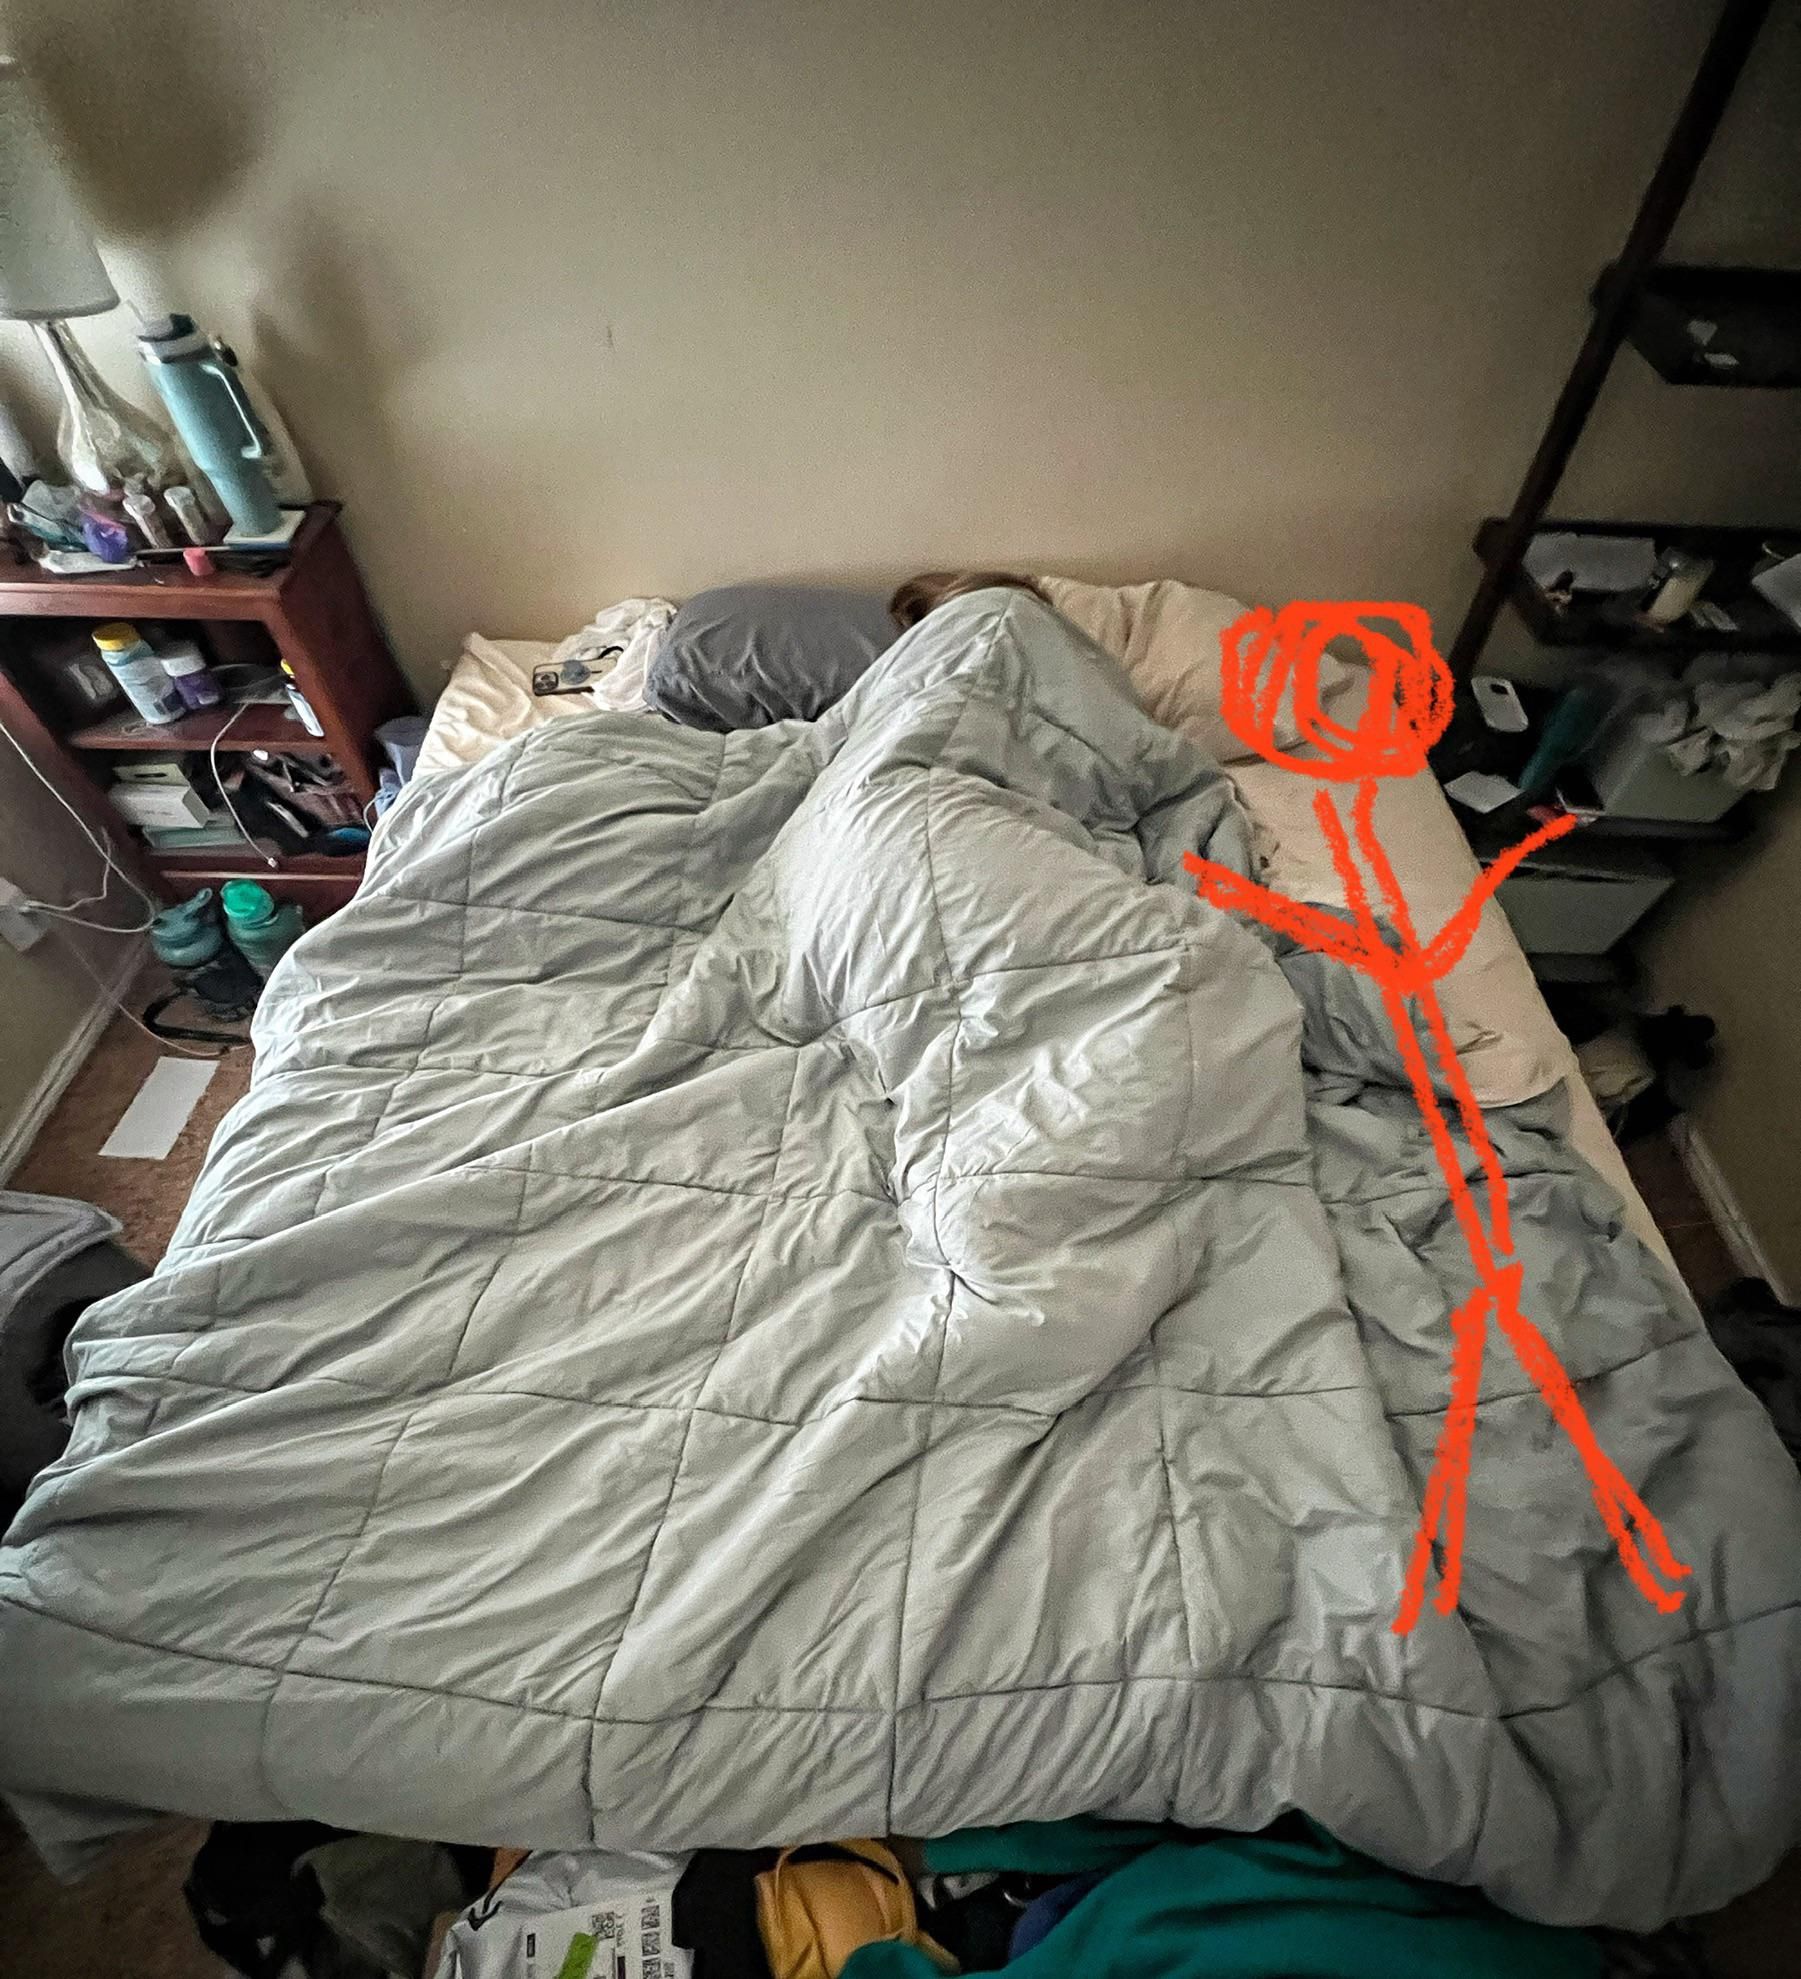 Artist rendering of how much space my wife leaves me in bed. Approx 5000 square inches of a possible 6080. Shes the Ghengis Khan of the king mattress